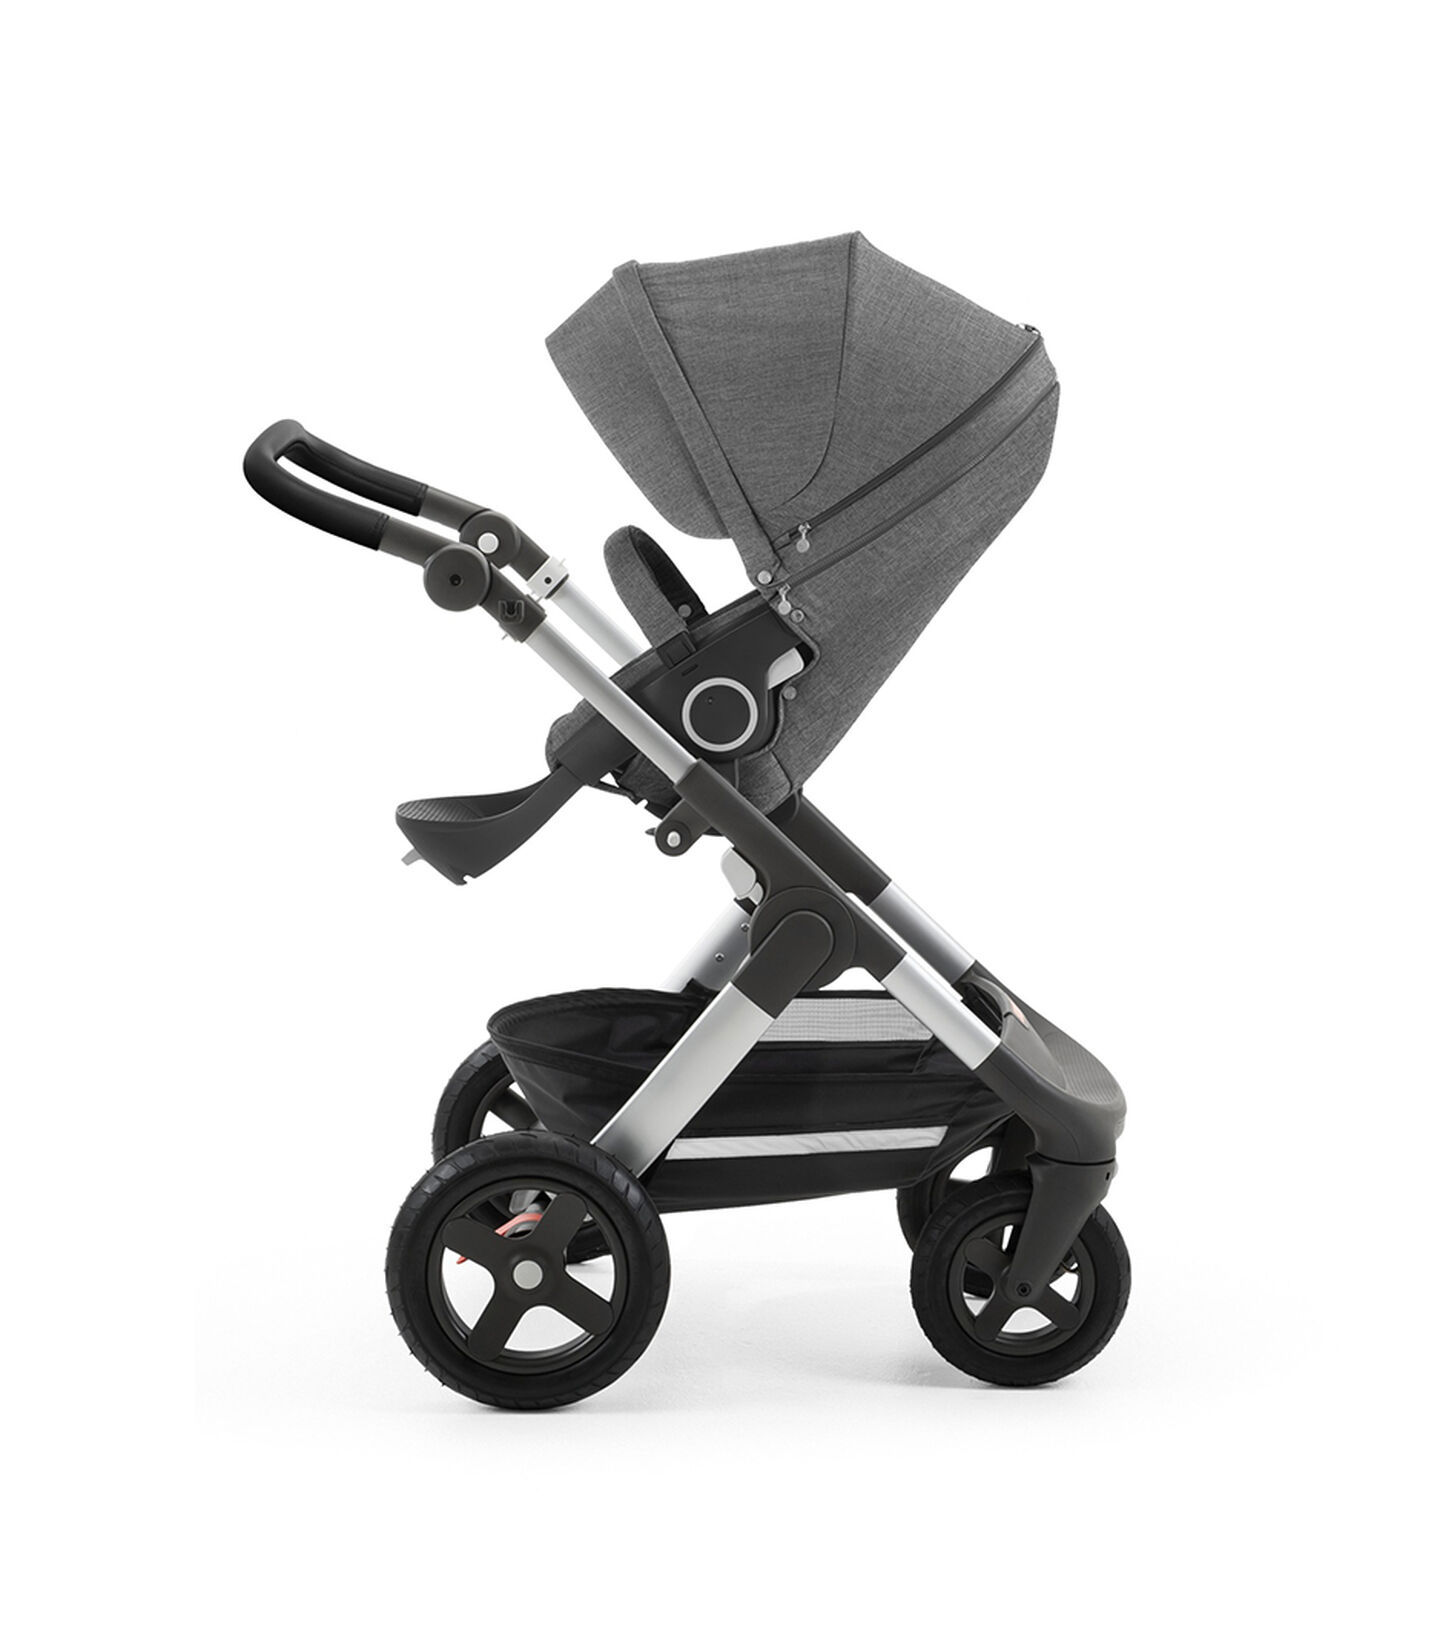 Stokke® Trailz™ with silver chassis and Stokke® Stroller Seat, Black Melange. Leatherette Handle. Terrain Wheels. view 1